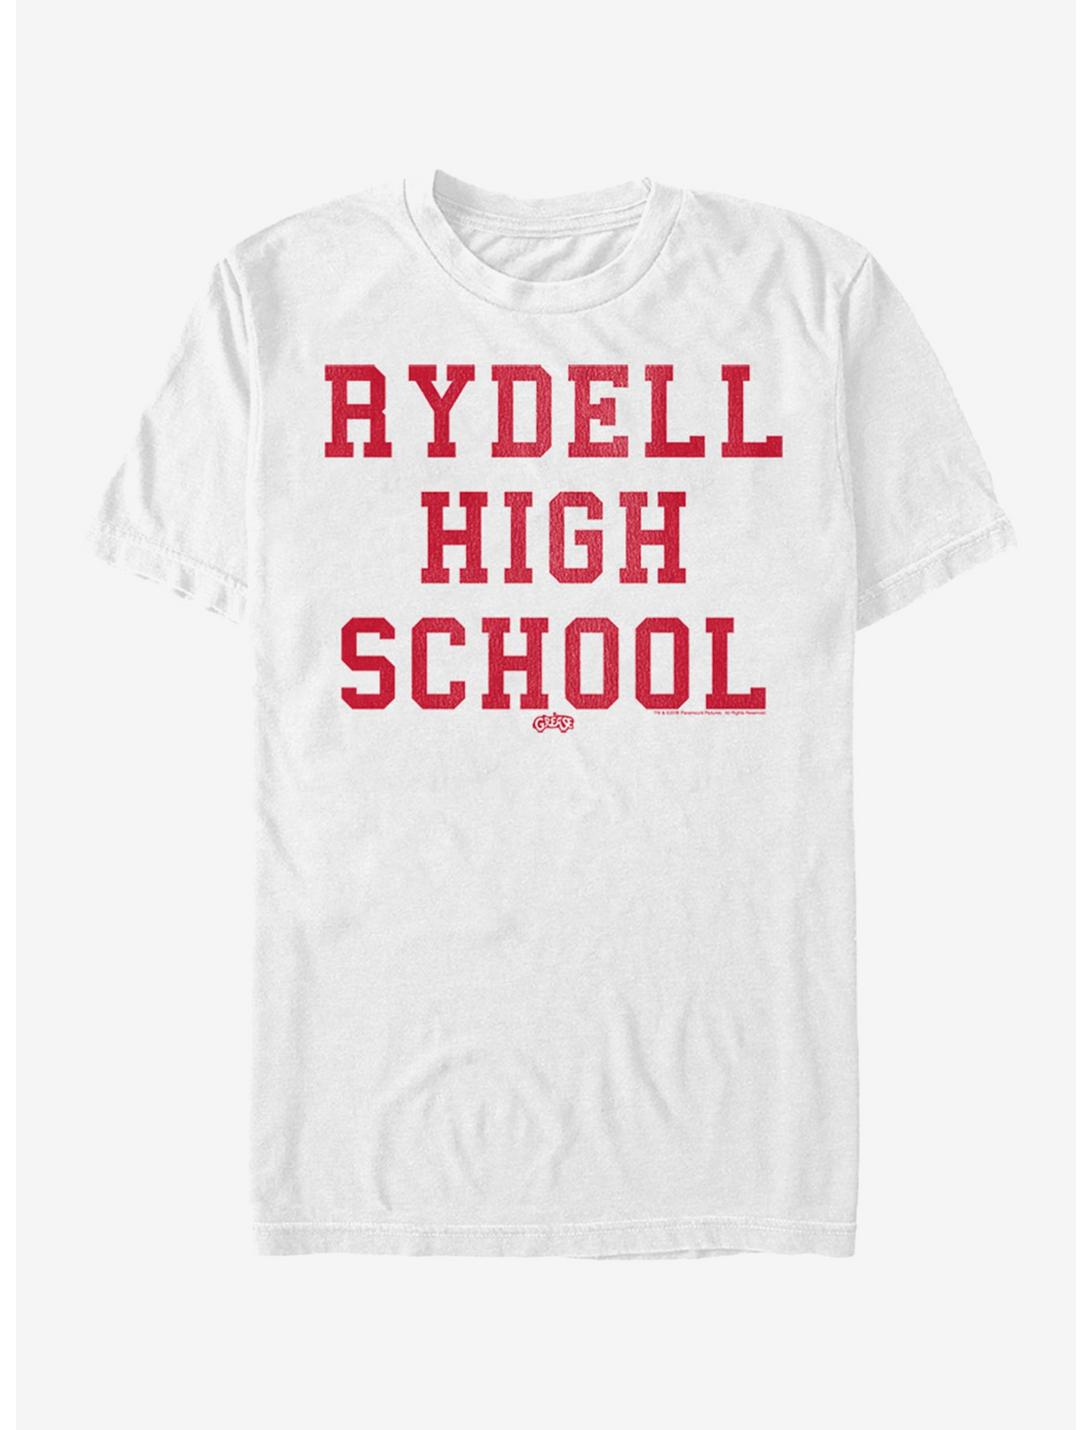 Grease Rydell High School T-Shirt, WHITE, hi-res